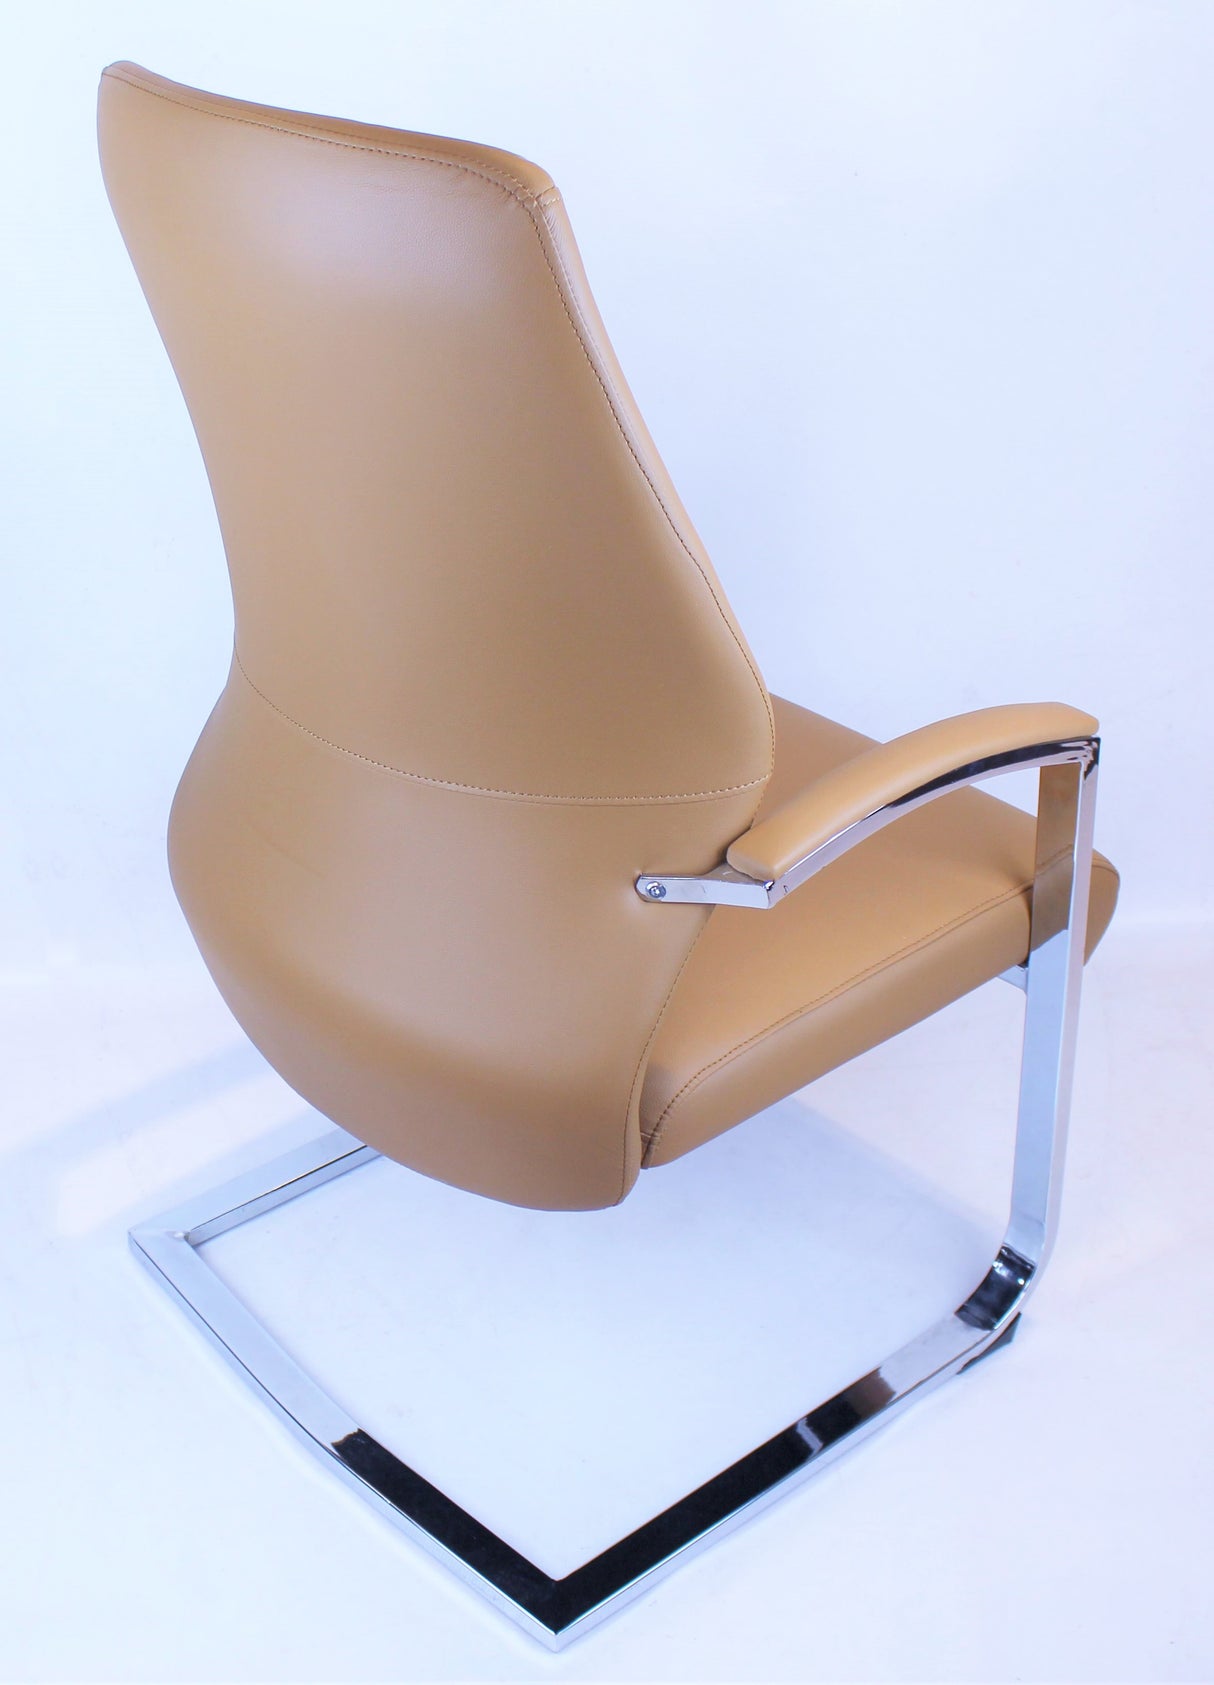 Modern Beige Leather Meeting Chairs - DH-103-2